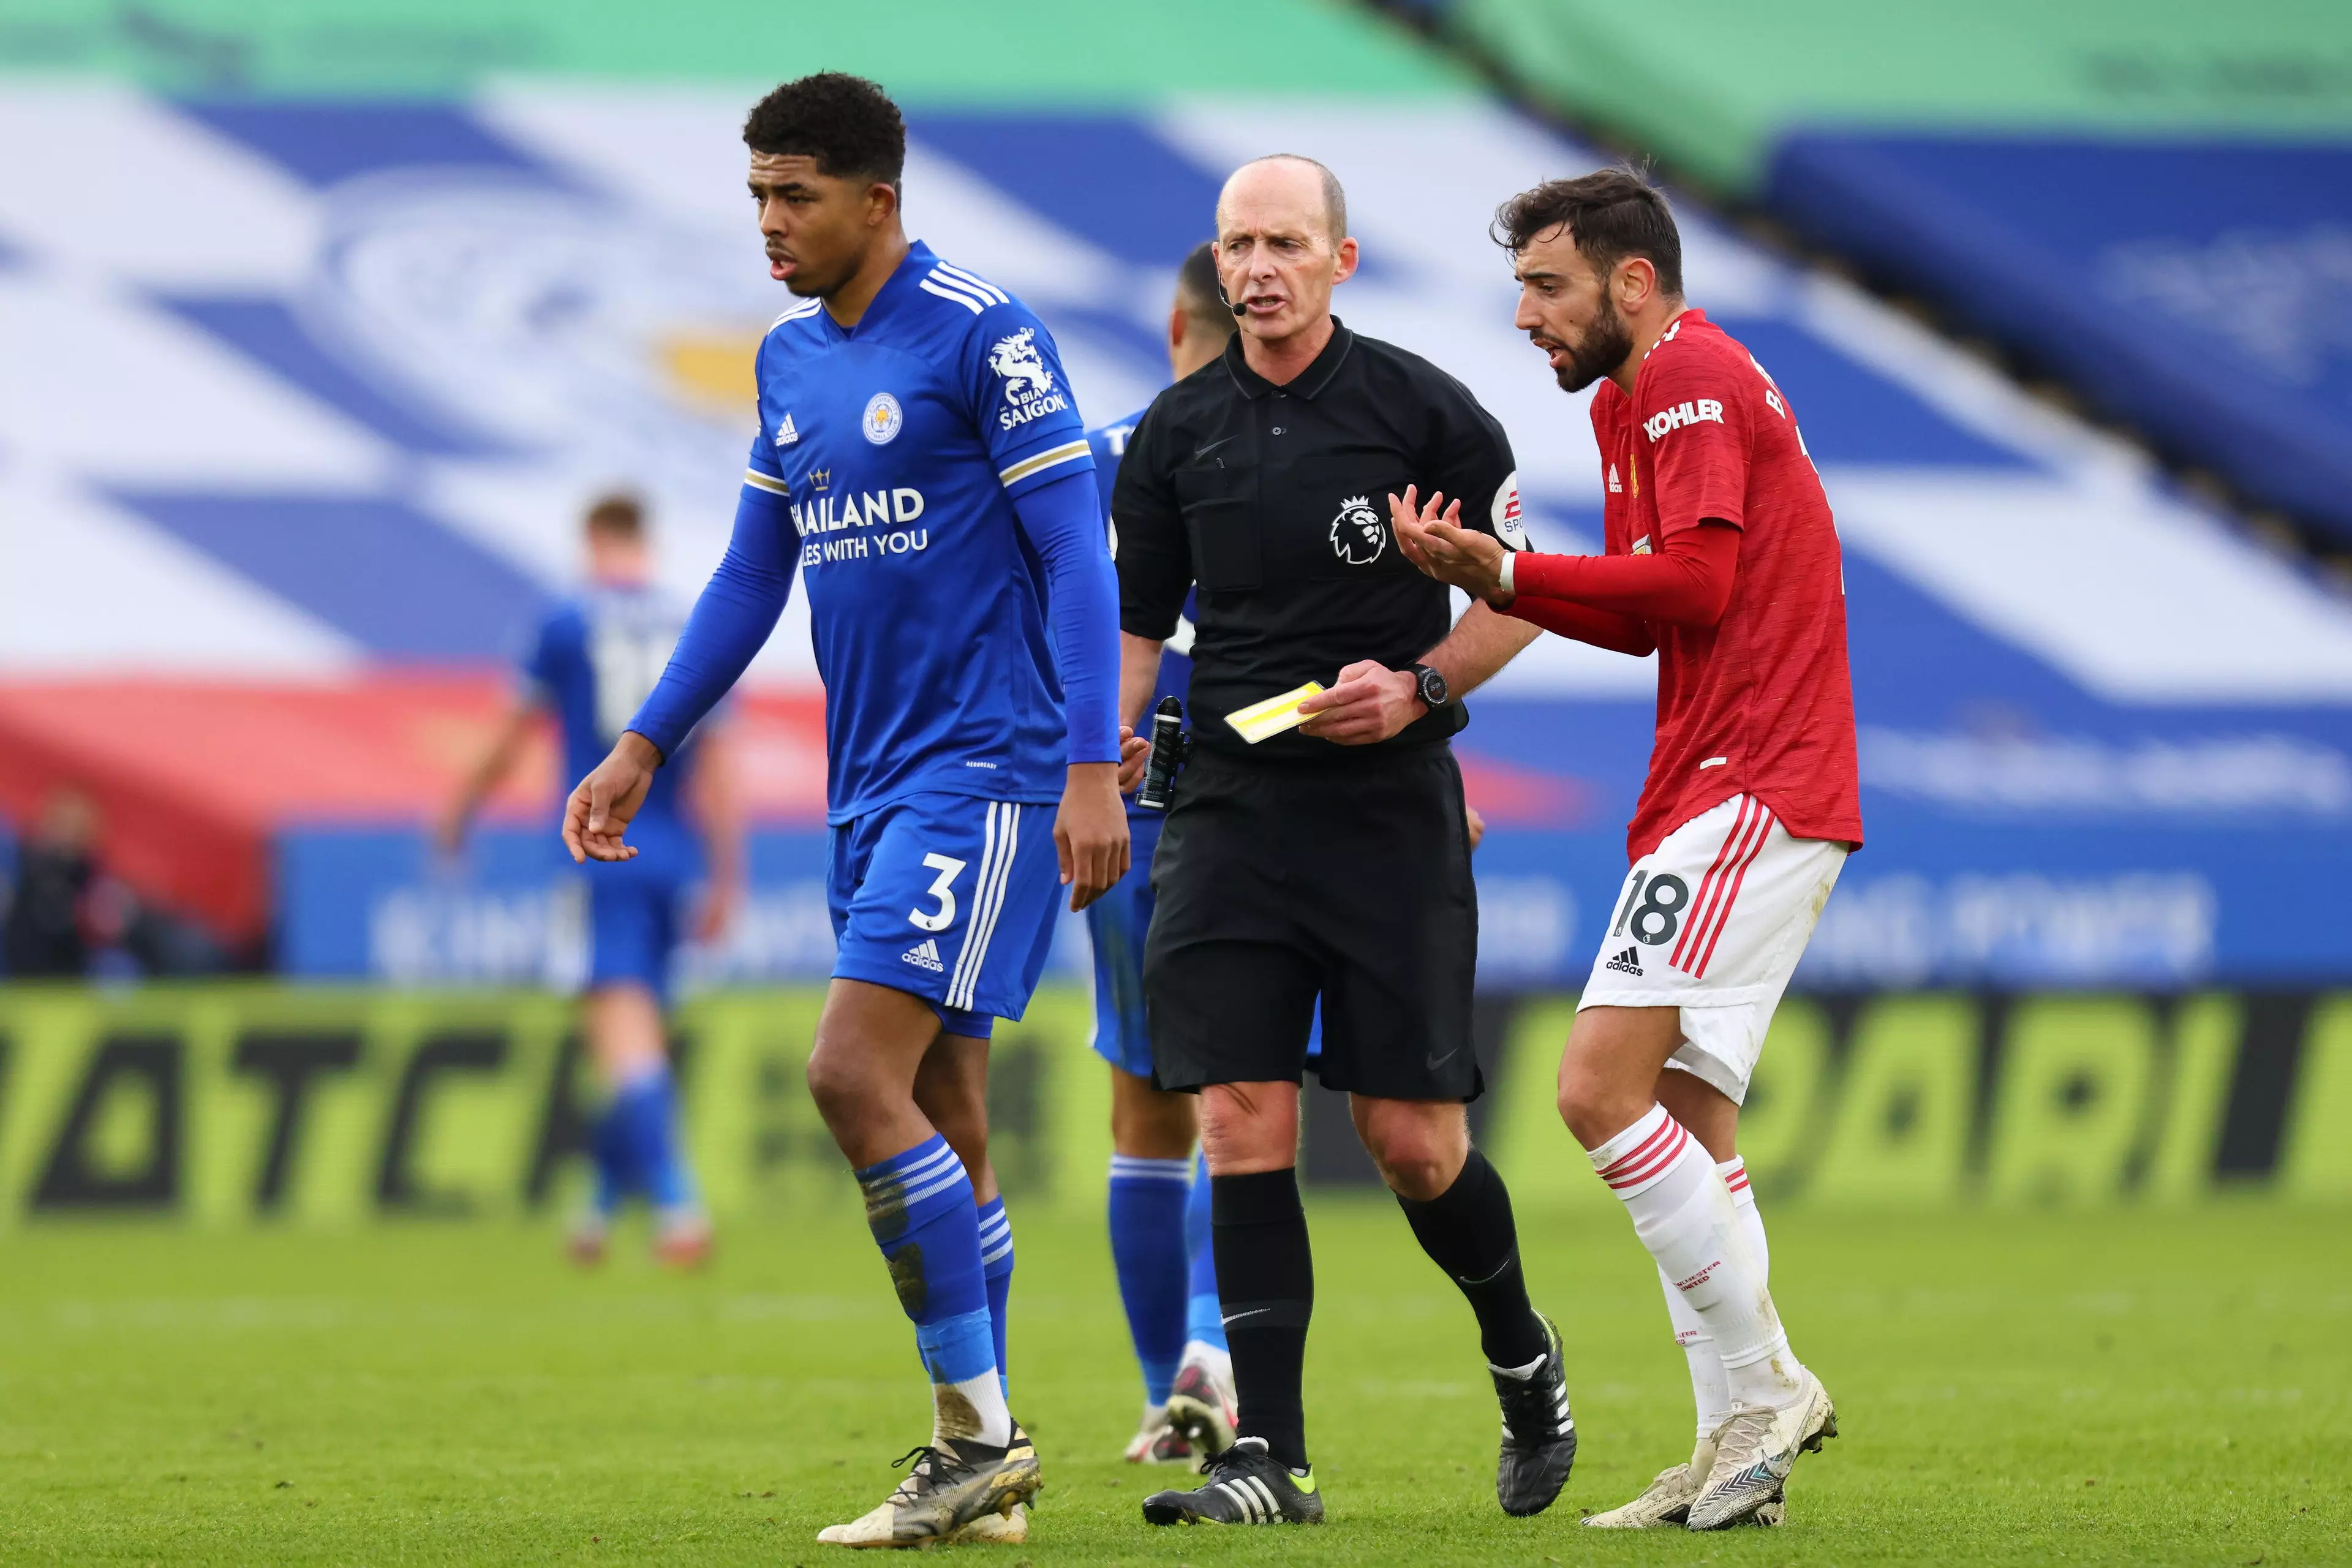 Tony Cascarino says Bruno Fernandes complains about refereeing decisions too much